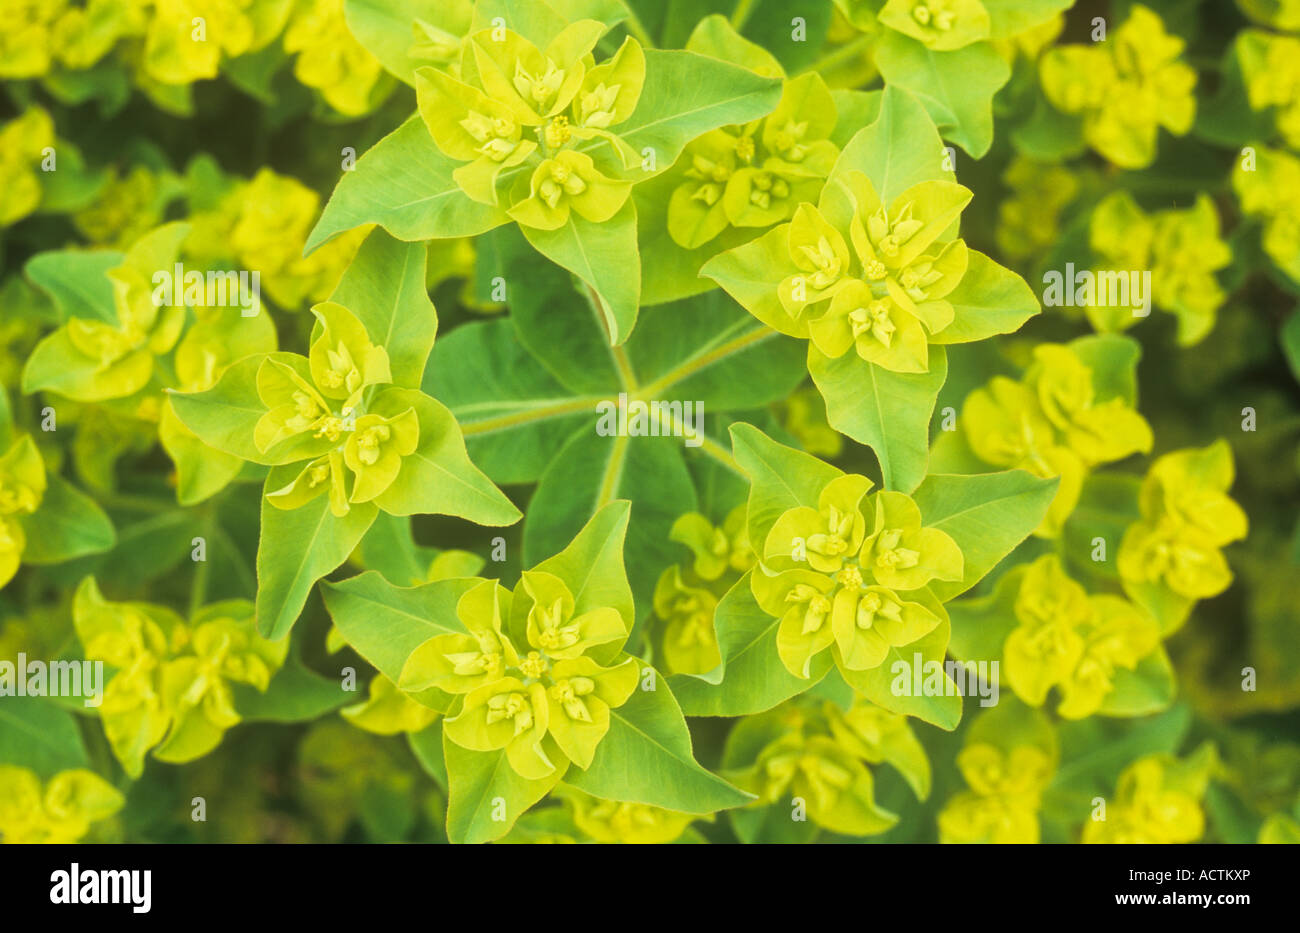 Close up of splayed stem of sulphur yellow and lime green bracts and flowers of Cushion spurge or Euphorbia epithymoides Stock Photo